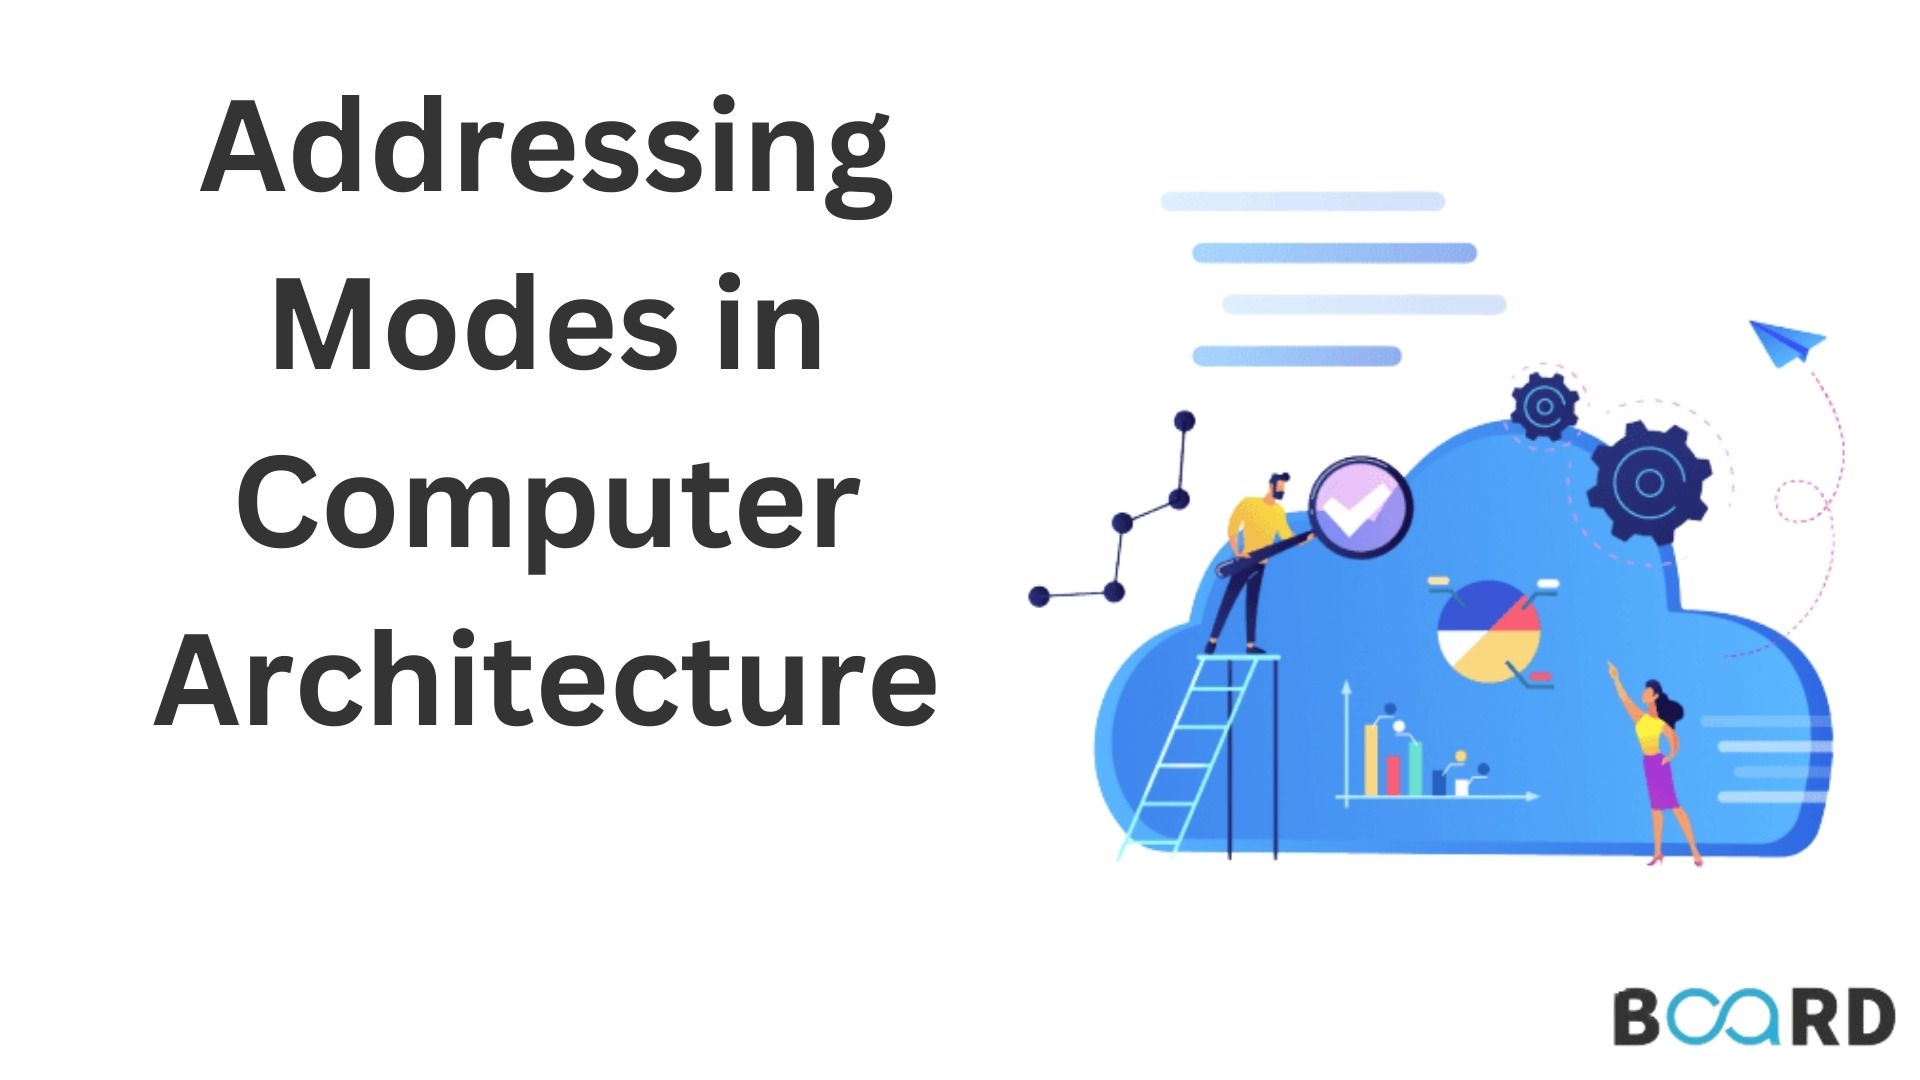 A Quick Guide to Addressing Modes in Computer Architecture